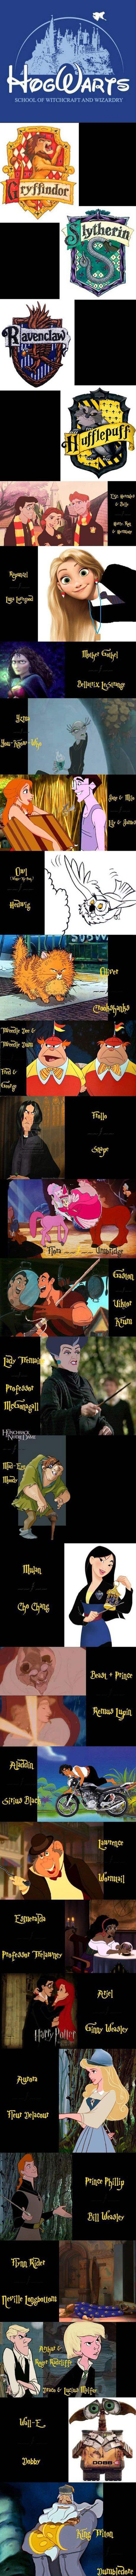 What if Disney Made Harry Potter...